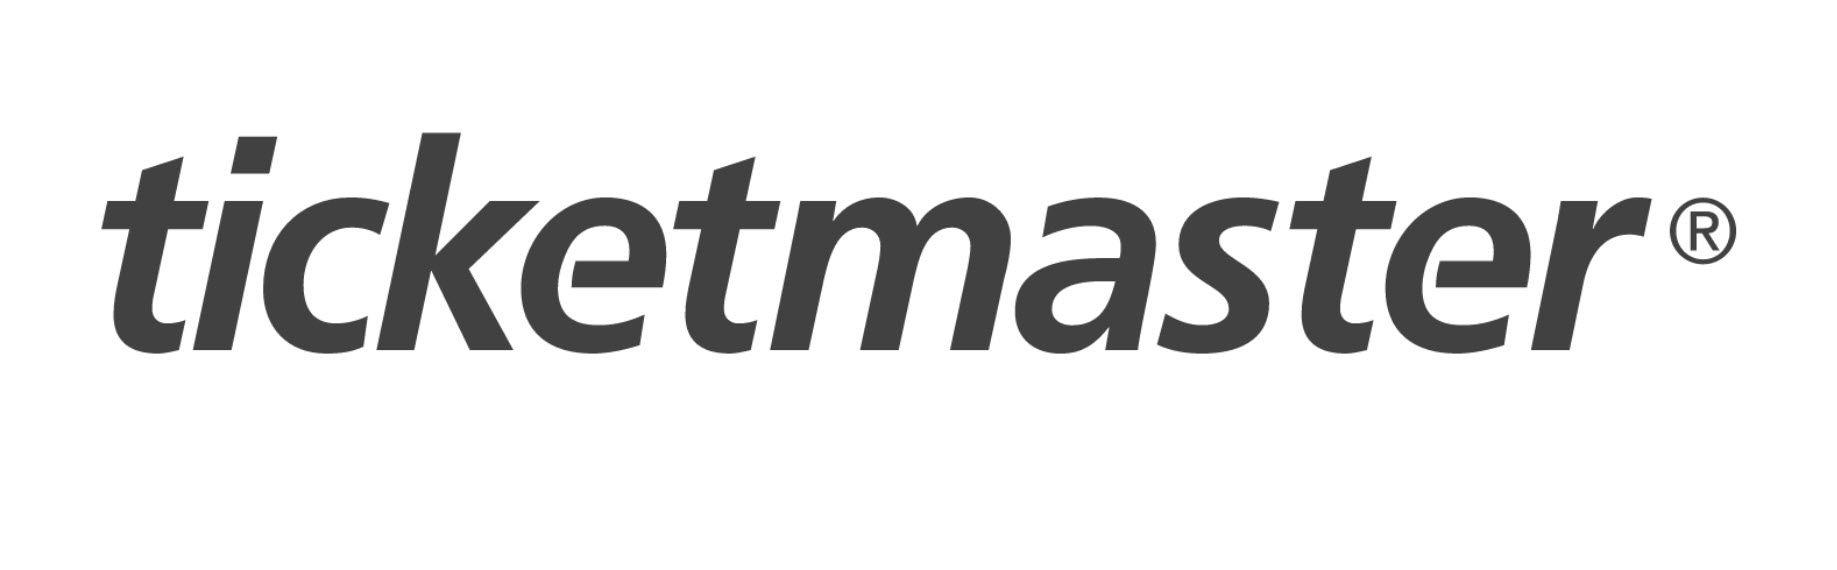 Ticketmaster Logo - ticketmaster logo Customer Service Contact Numbers Lists